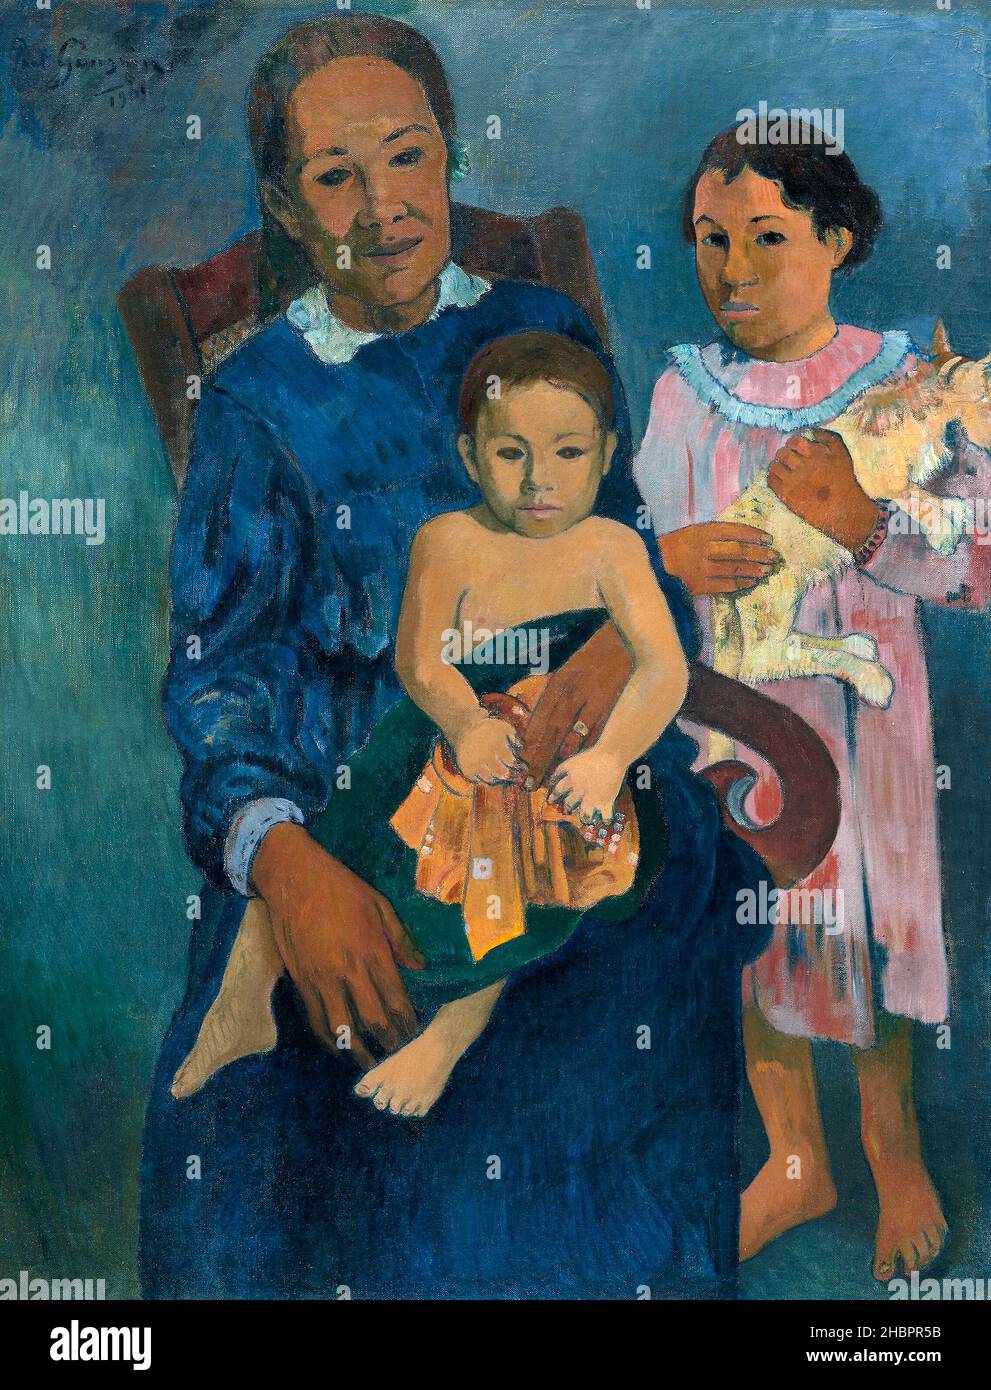 Polynesian Woman with Children (1901) by Paul Gauguin. Stock Photo